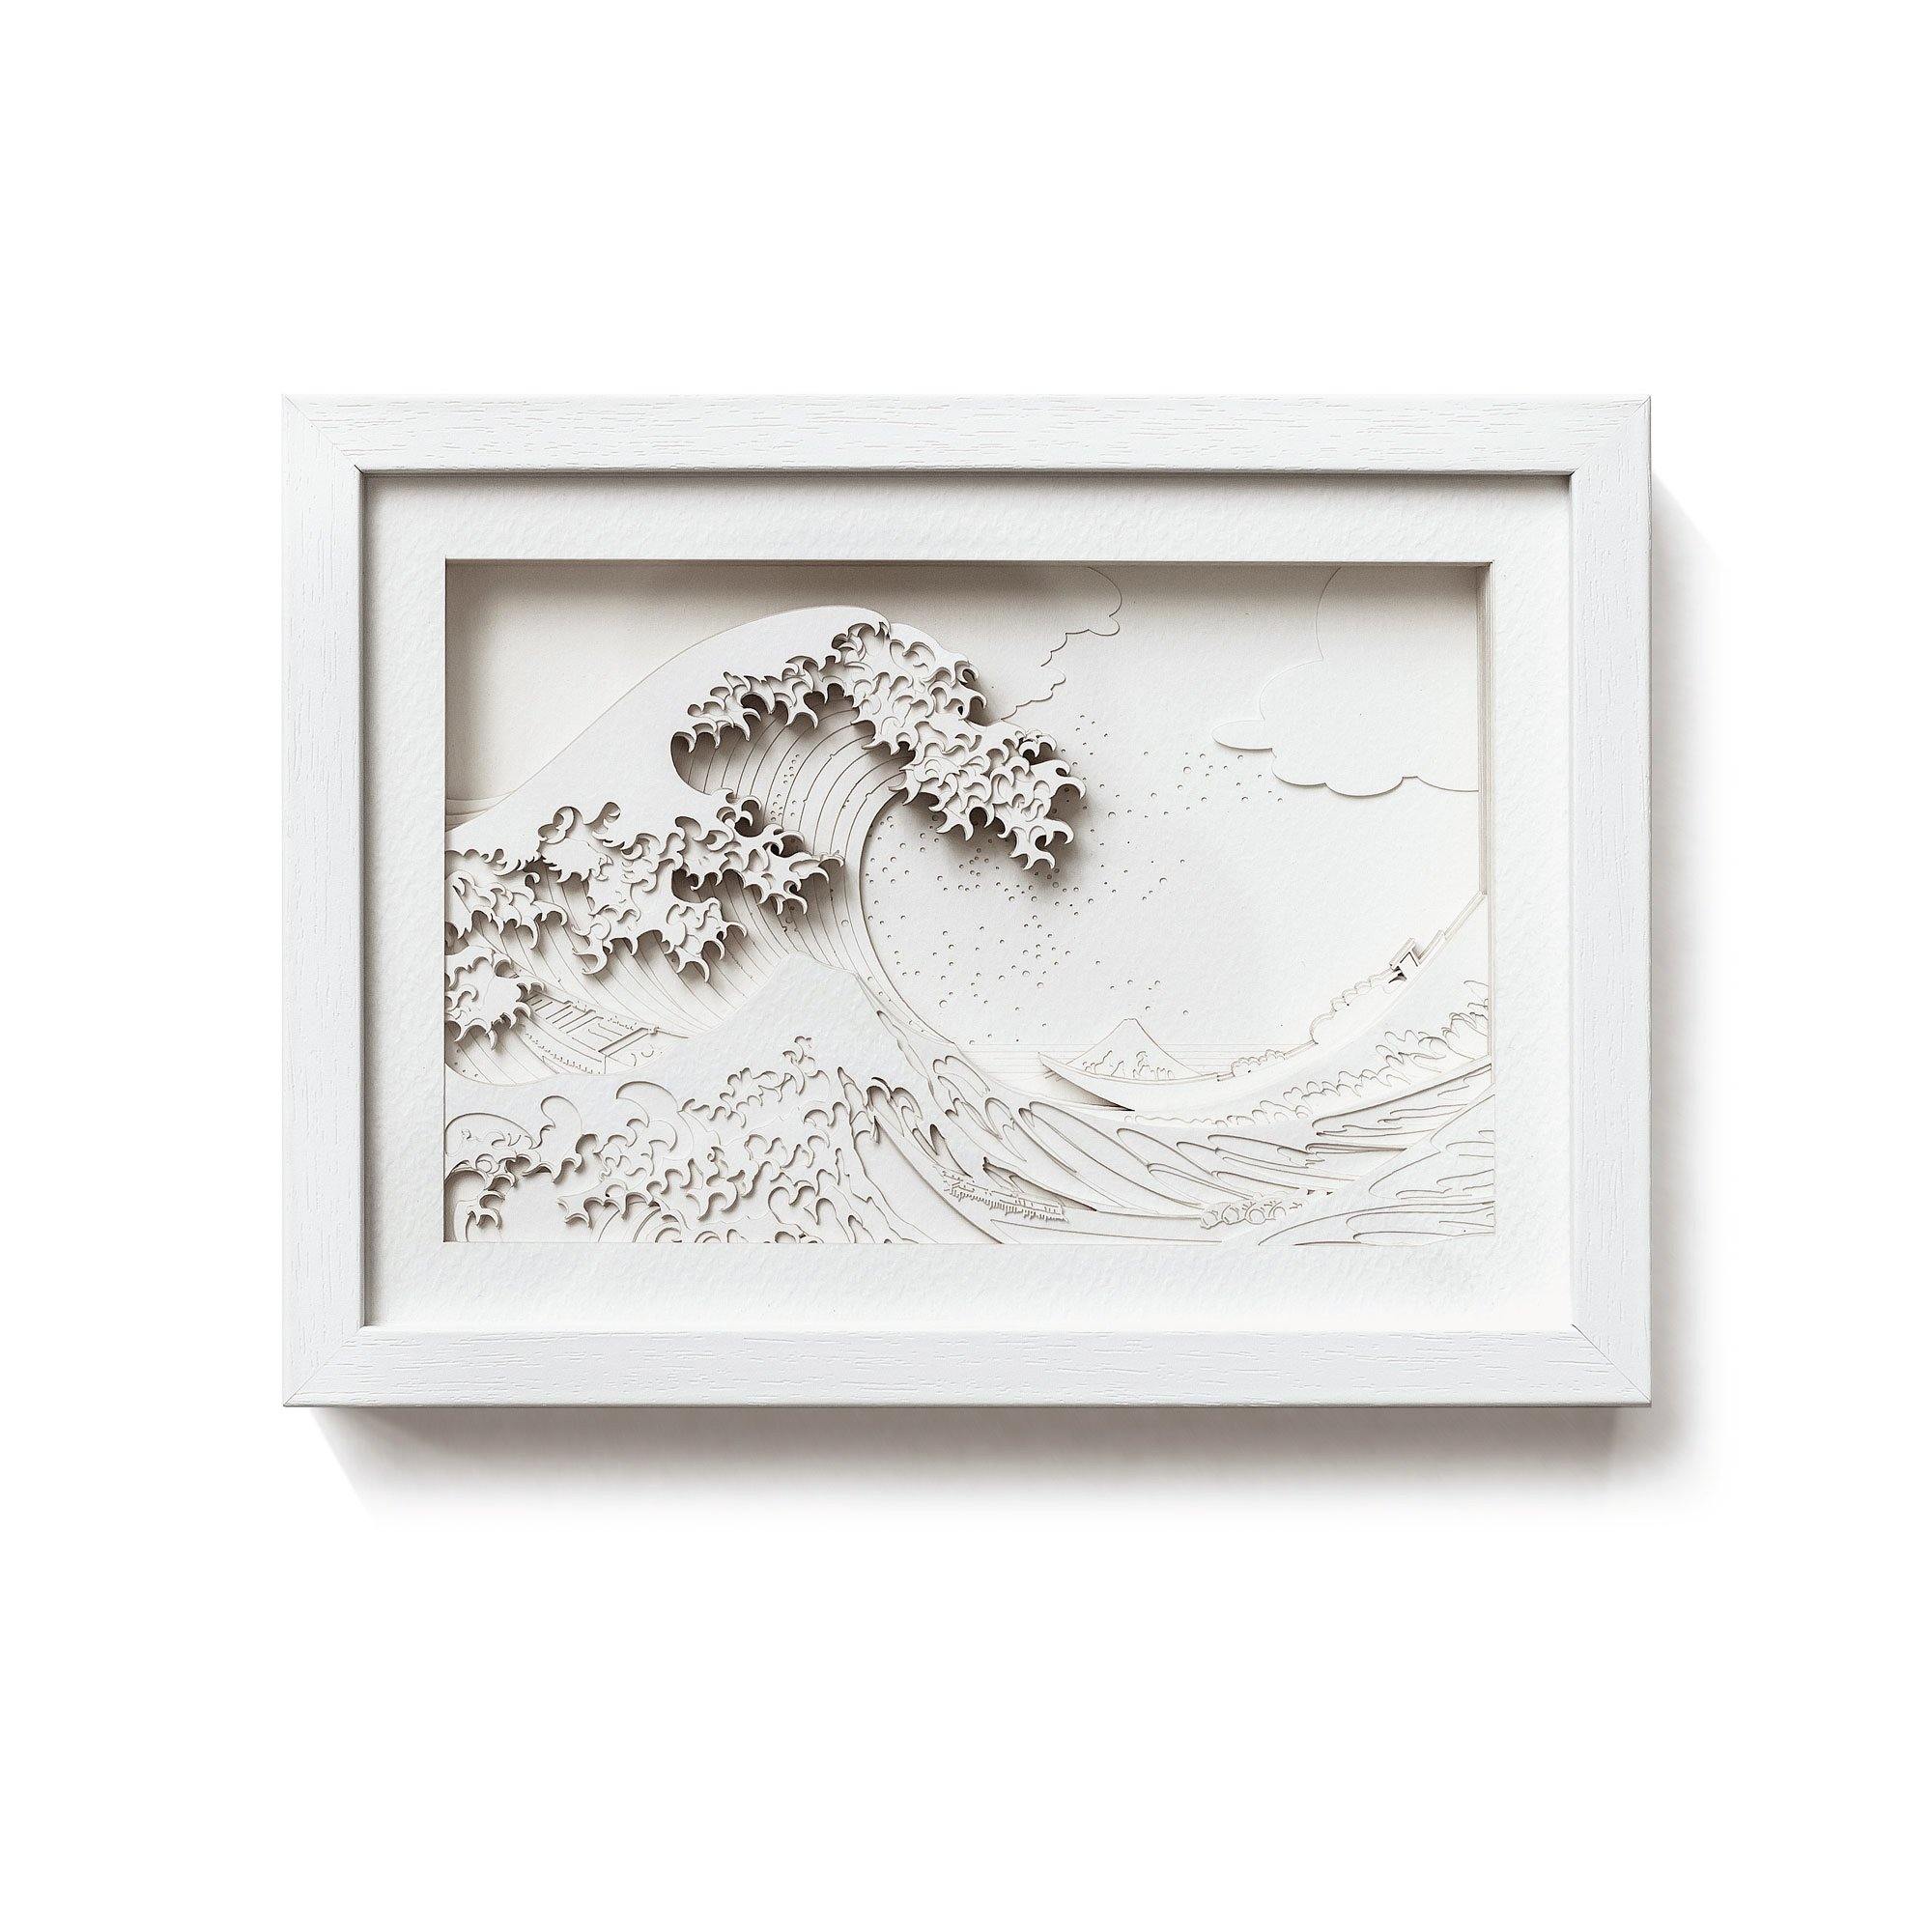 o3designstudio The Great Wave off Kanagawa Paper Art  IDEAL GIFTS A5 white framed mian PA3001